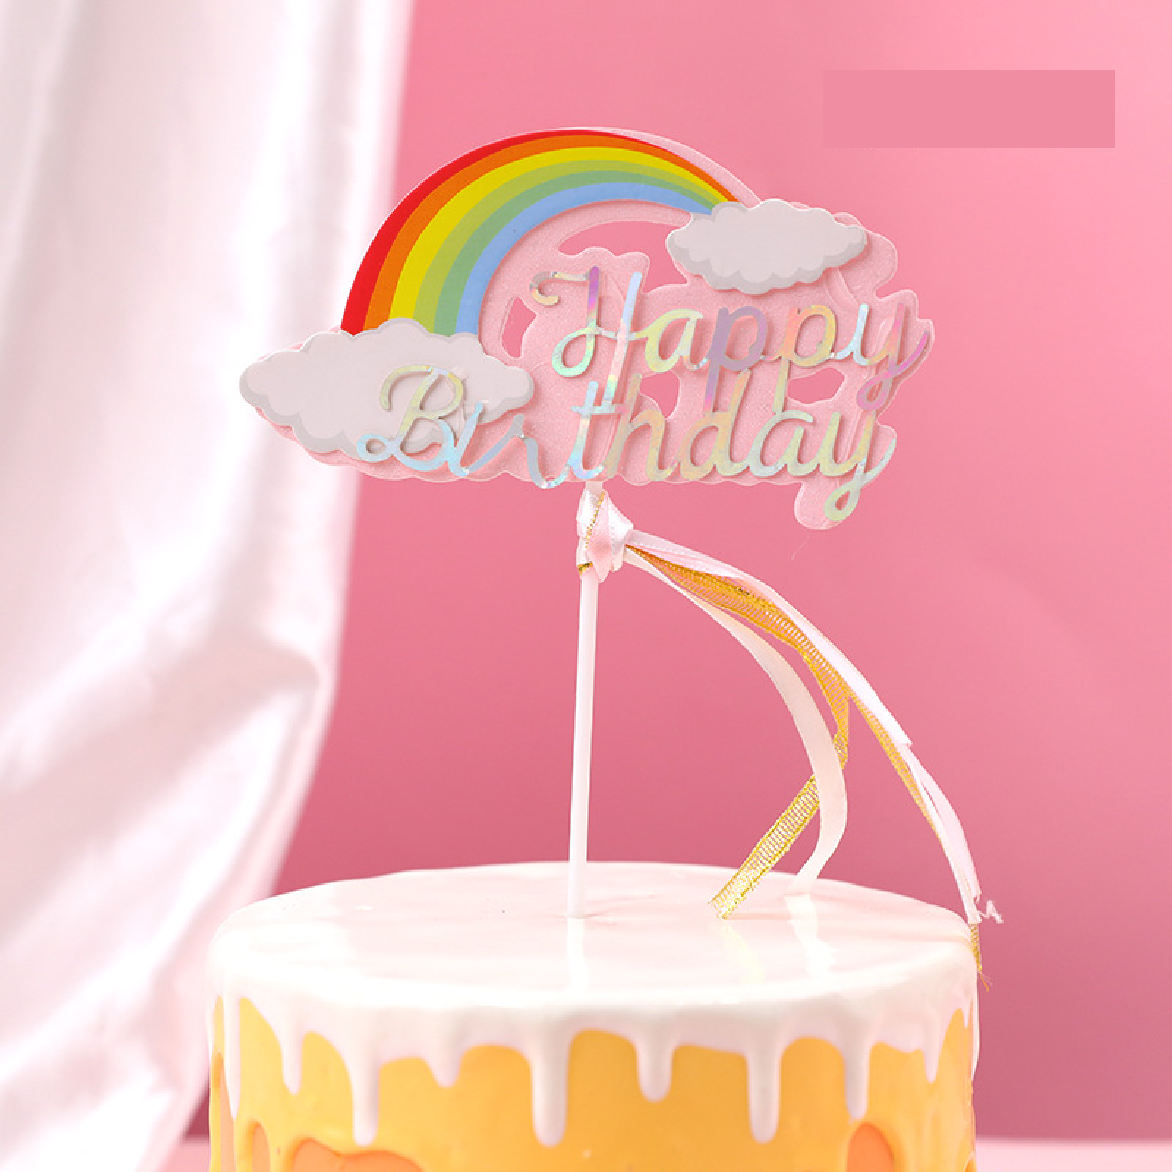 Cake Topper Cake Decoration- 'Happy Birthday' with rainbow, cloud and tassels - pink - Rampant Coffee Company